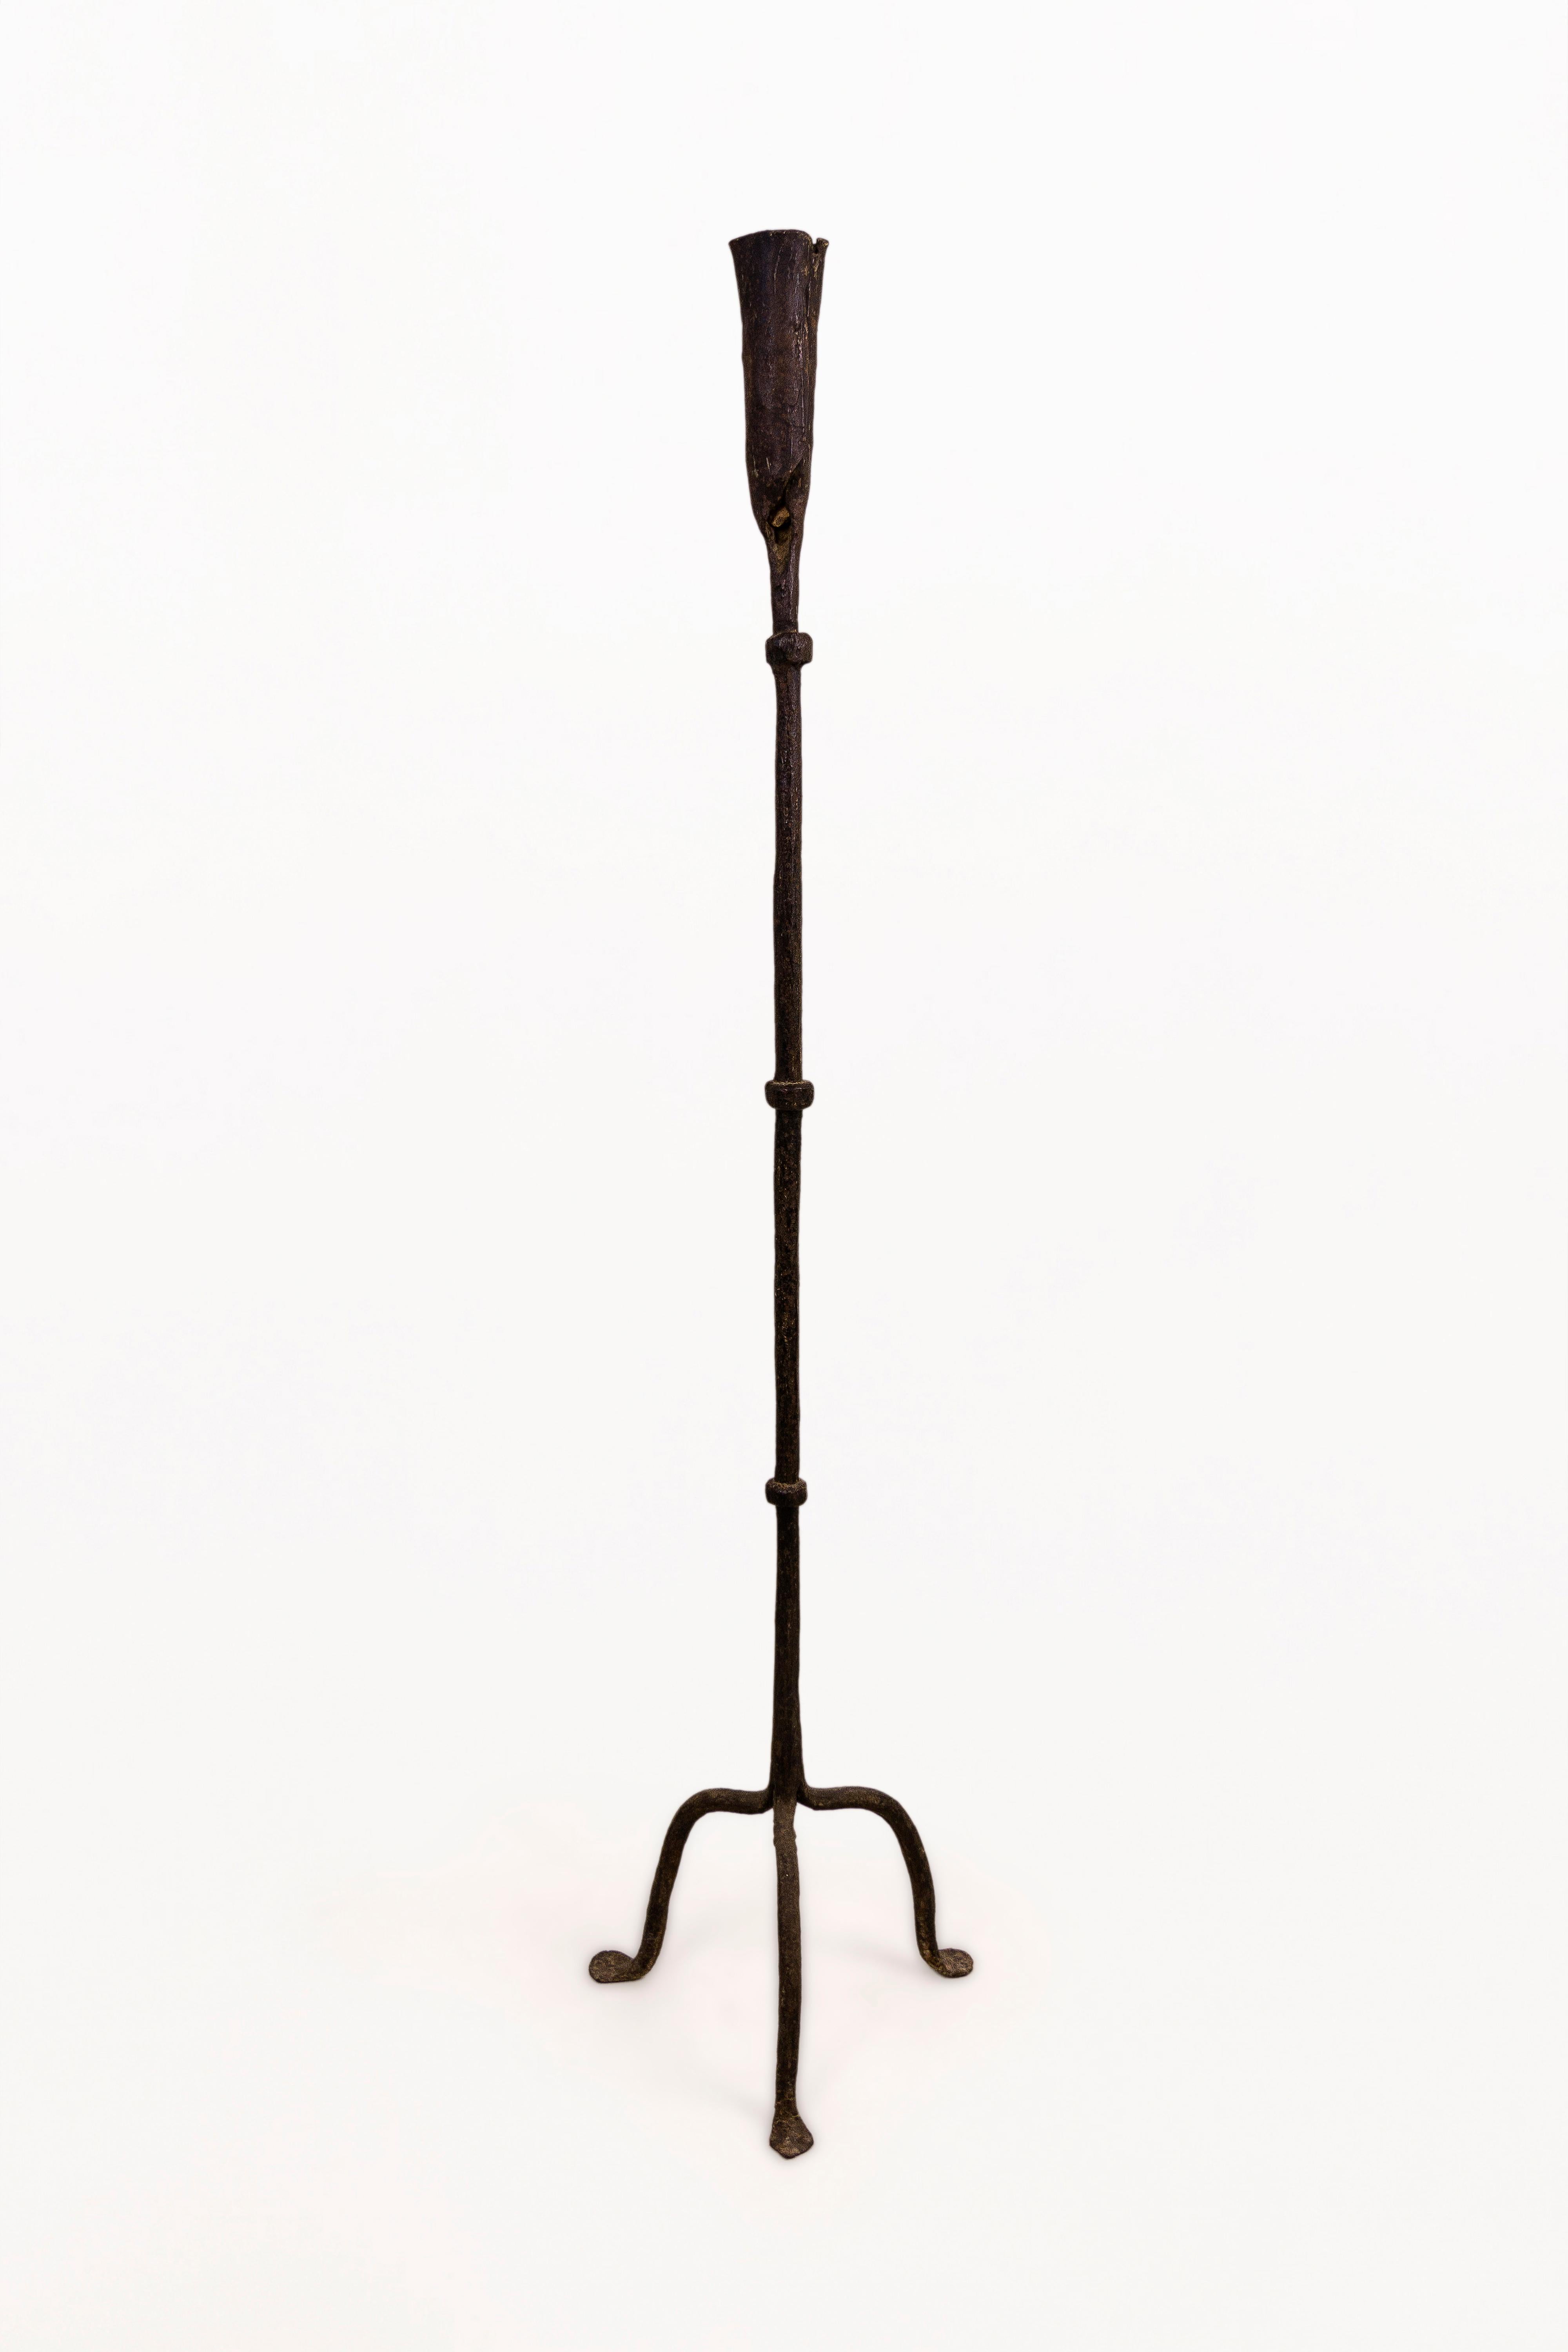 Medieval Iron Candleholder, 15th Century, Spain